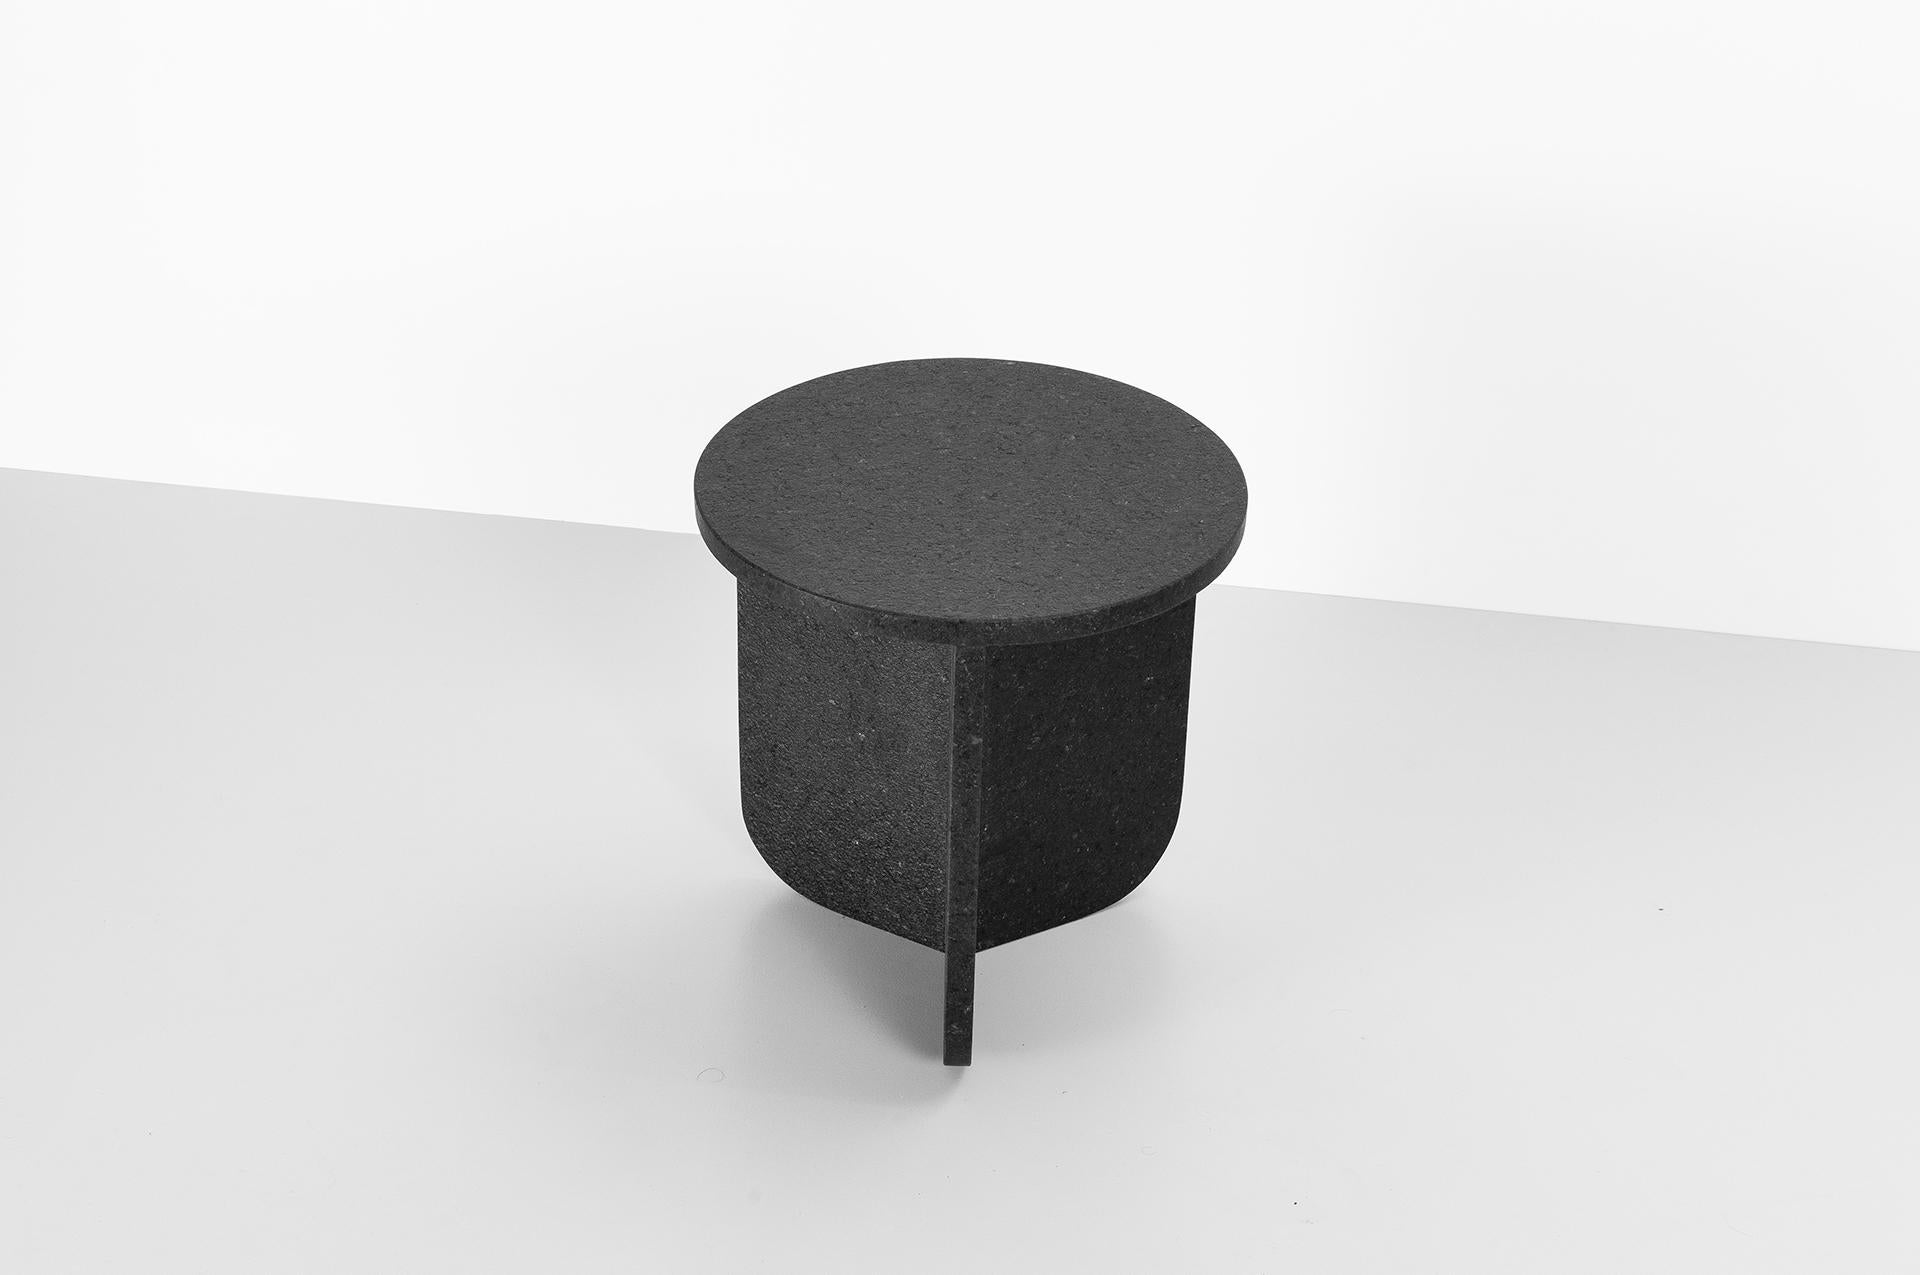 International Style Leme Table, High, by RAIN, Contemporary Side Table, Brazilian Granite For Sale